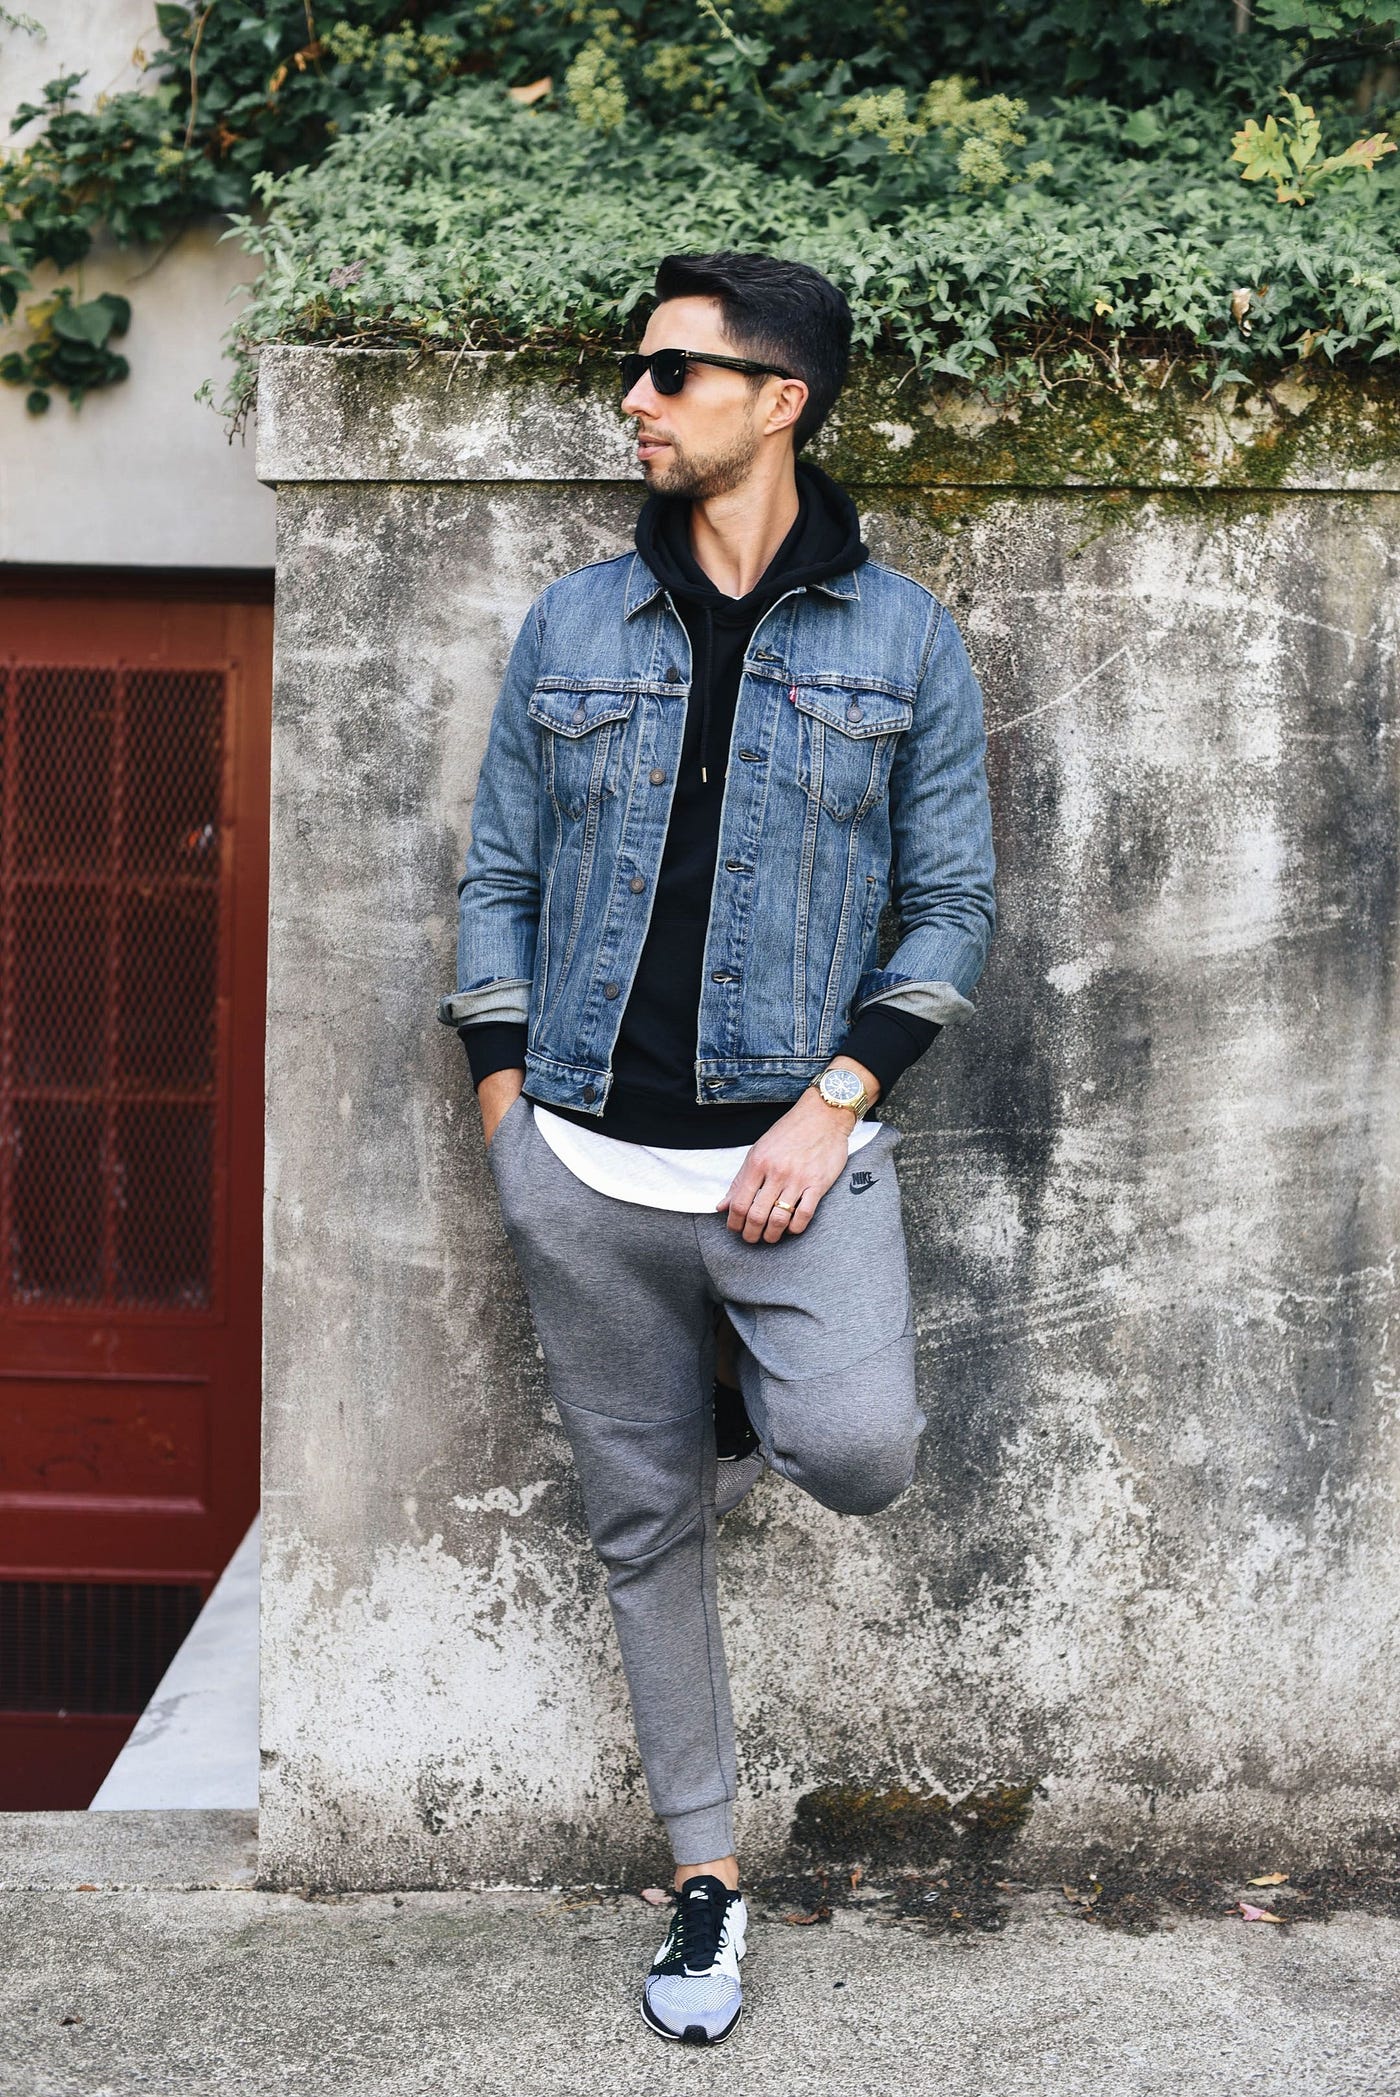 Sweatpants and Denim Jacket: The Perfect Streetwear Look | by Chamanmaes |  Medium